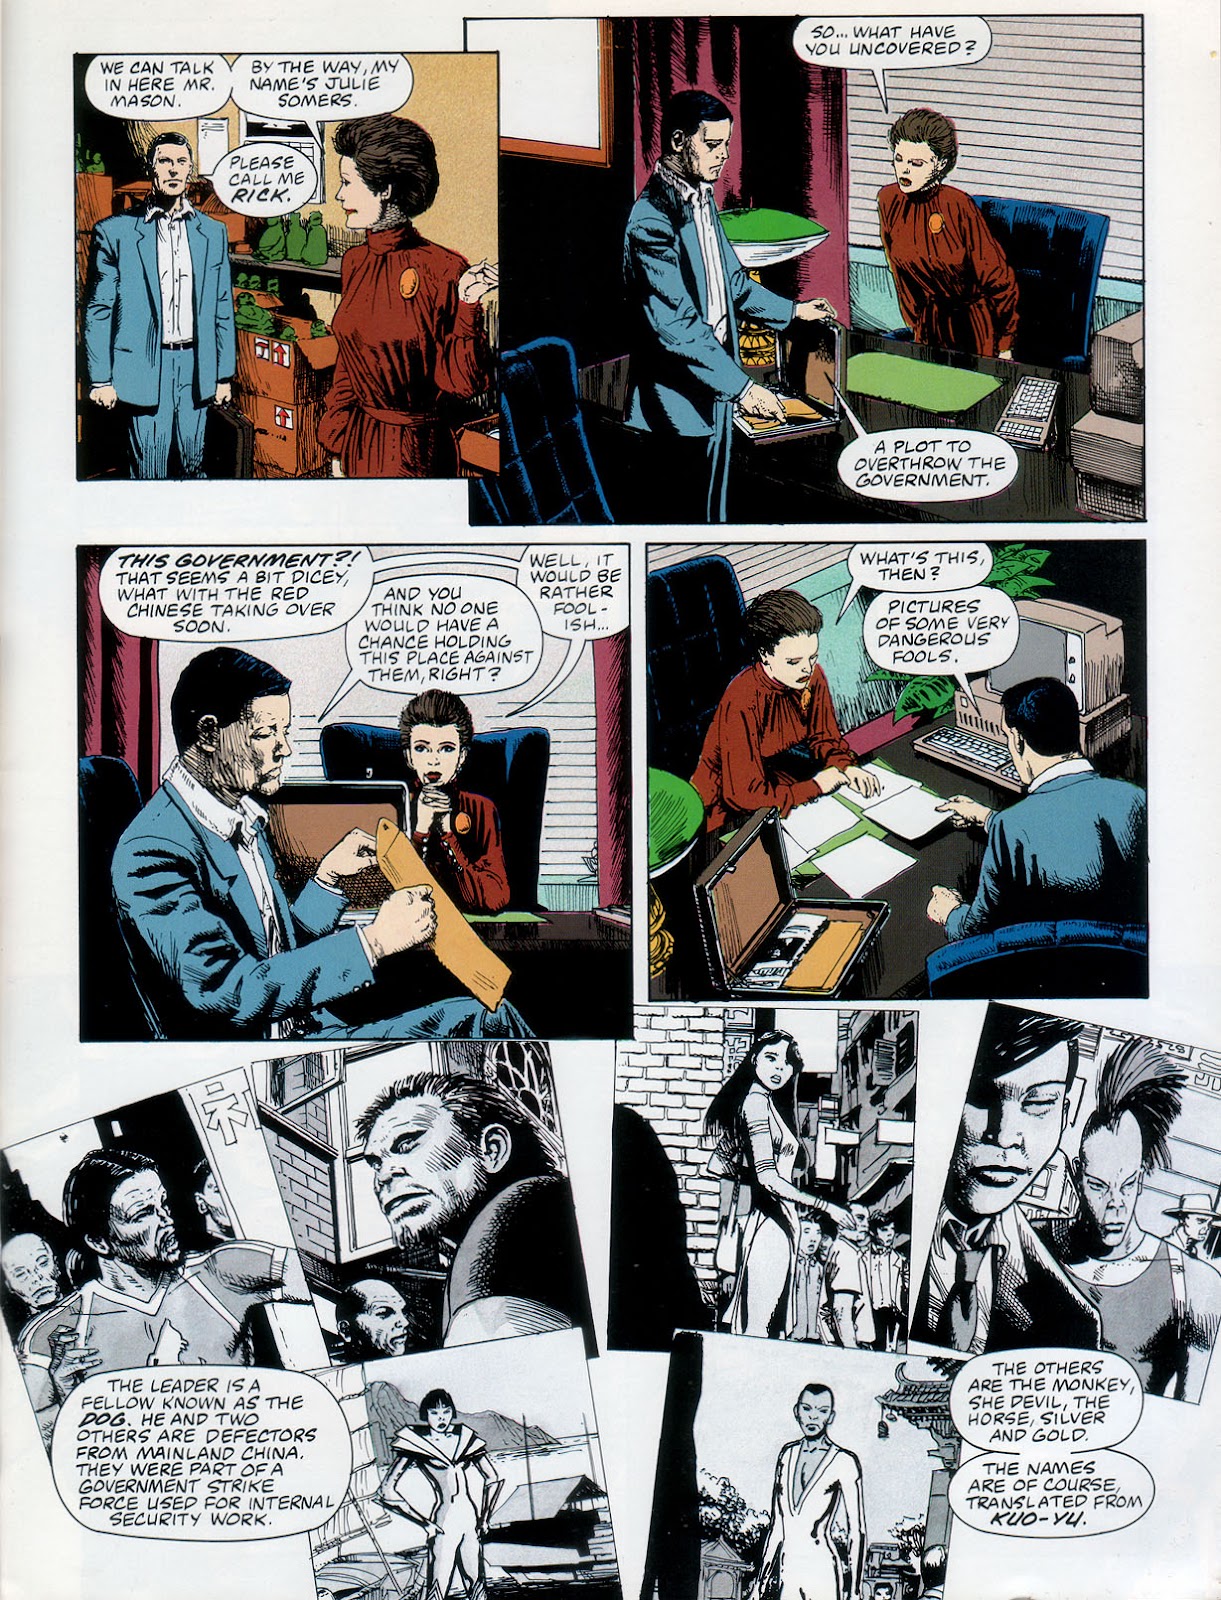 Marvel Graphic Novel issue 57 - Rick Mason - The Agent - Page 11